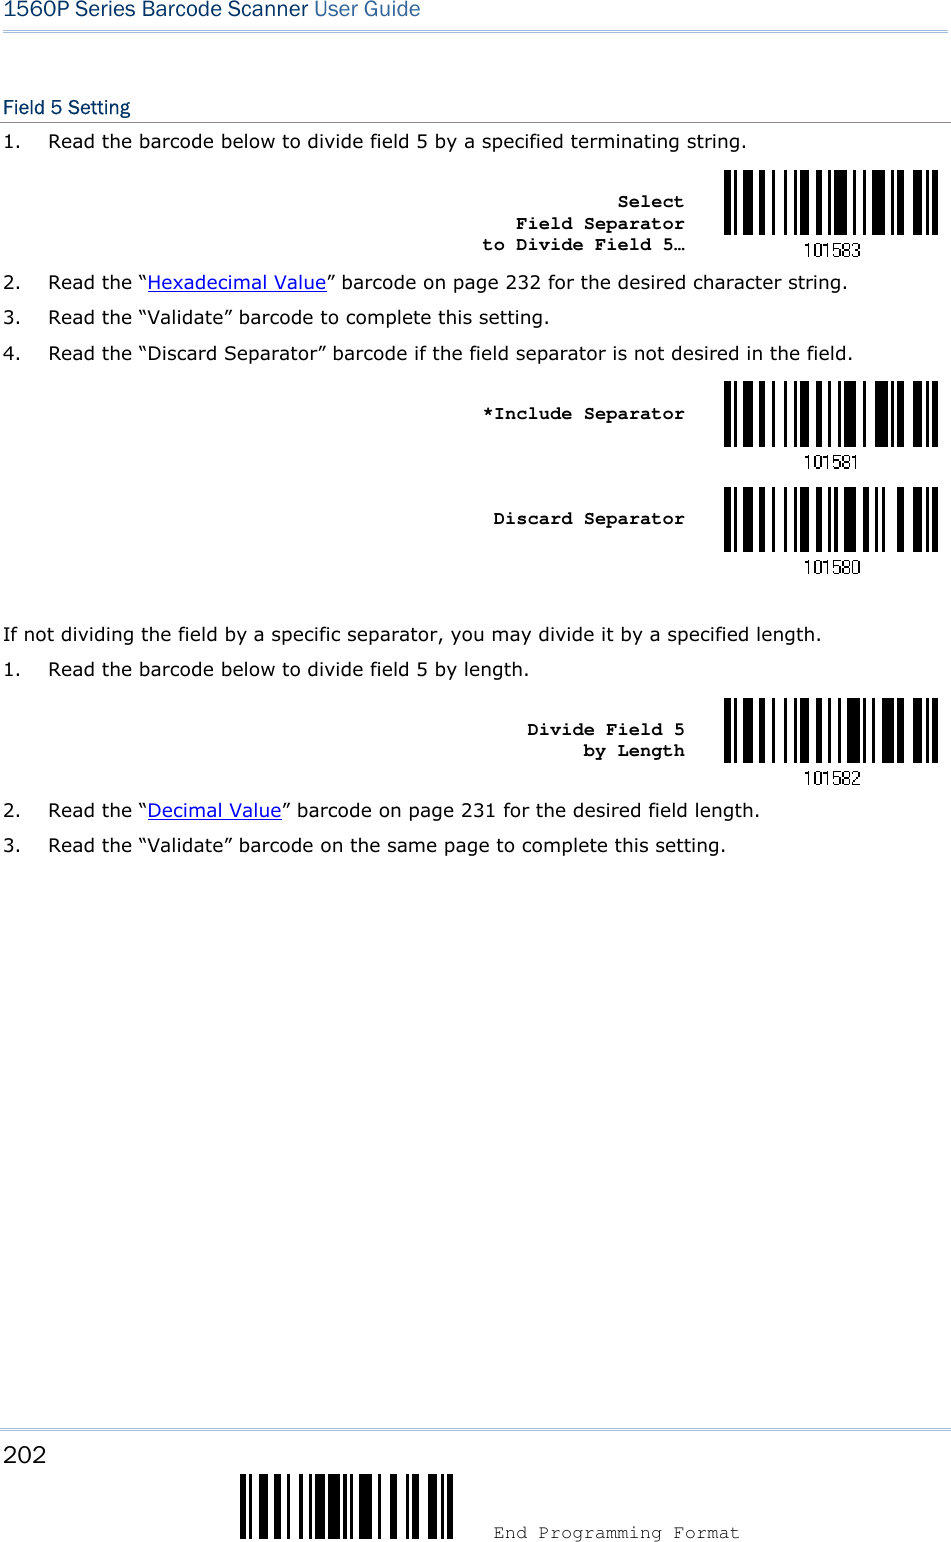 202  End Programming Format 1560P Series Barcode Scanner User Guide Field 5 Setting 1. Read the barcode below to divide field 5 by a specified terminating string.Select Field Separator to Divide Field 5… 2. Read the “Hexadecimal Value” barcode on page 232 for the desired character string.3. Read the “Validate” barcode to complete this setting.4. Read the “Discard Separator” barcode if the field separator is not desired in the field.*Include SeparatorDiscard Separator If not dividing the field by a specific separator, you may divide it by a specified length. 1. Read the barcode below to divide field 5 by length.Divide Field 5 by Length 2. Read the “Decimal Value” barcode on page 231 for the desired field length.3. Read the “Validate” barcode on the same page to complete this setting.